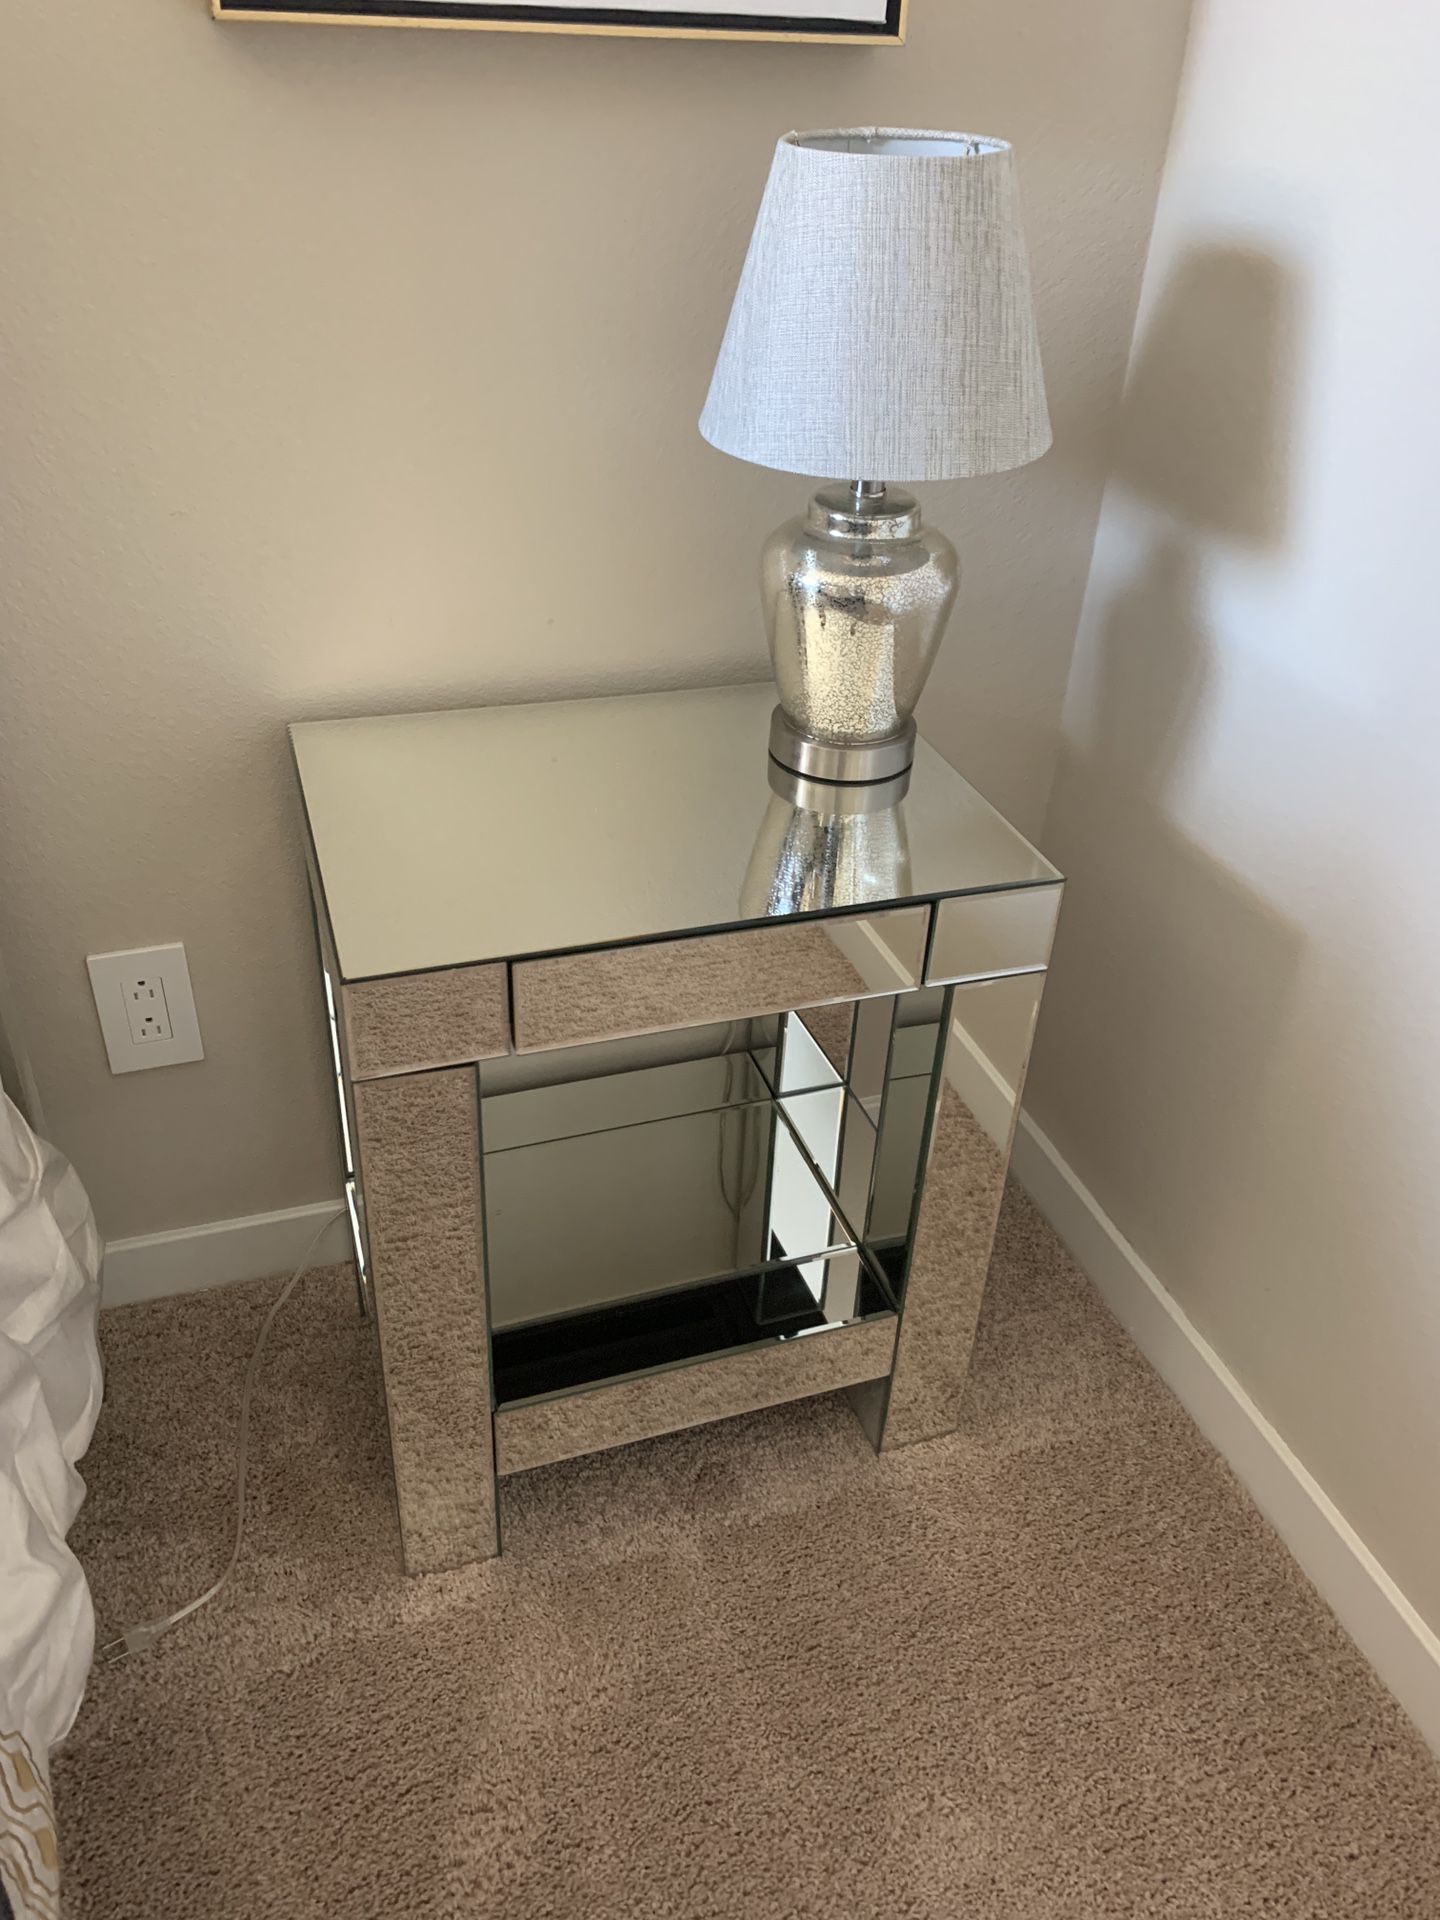 Mirrored side table with drawer